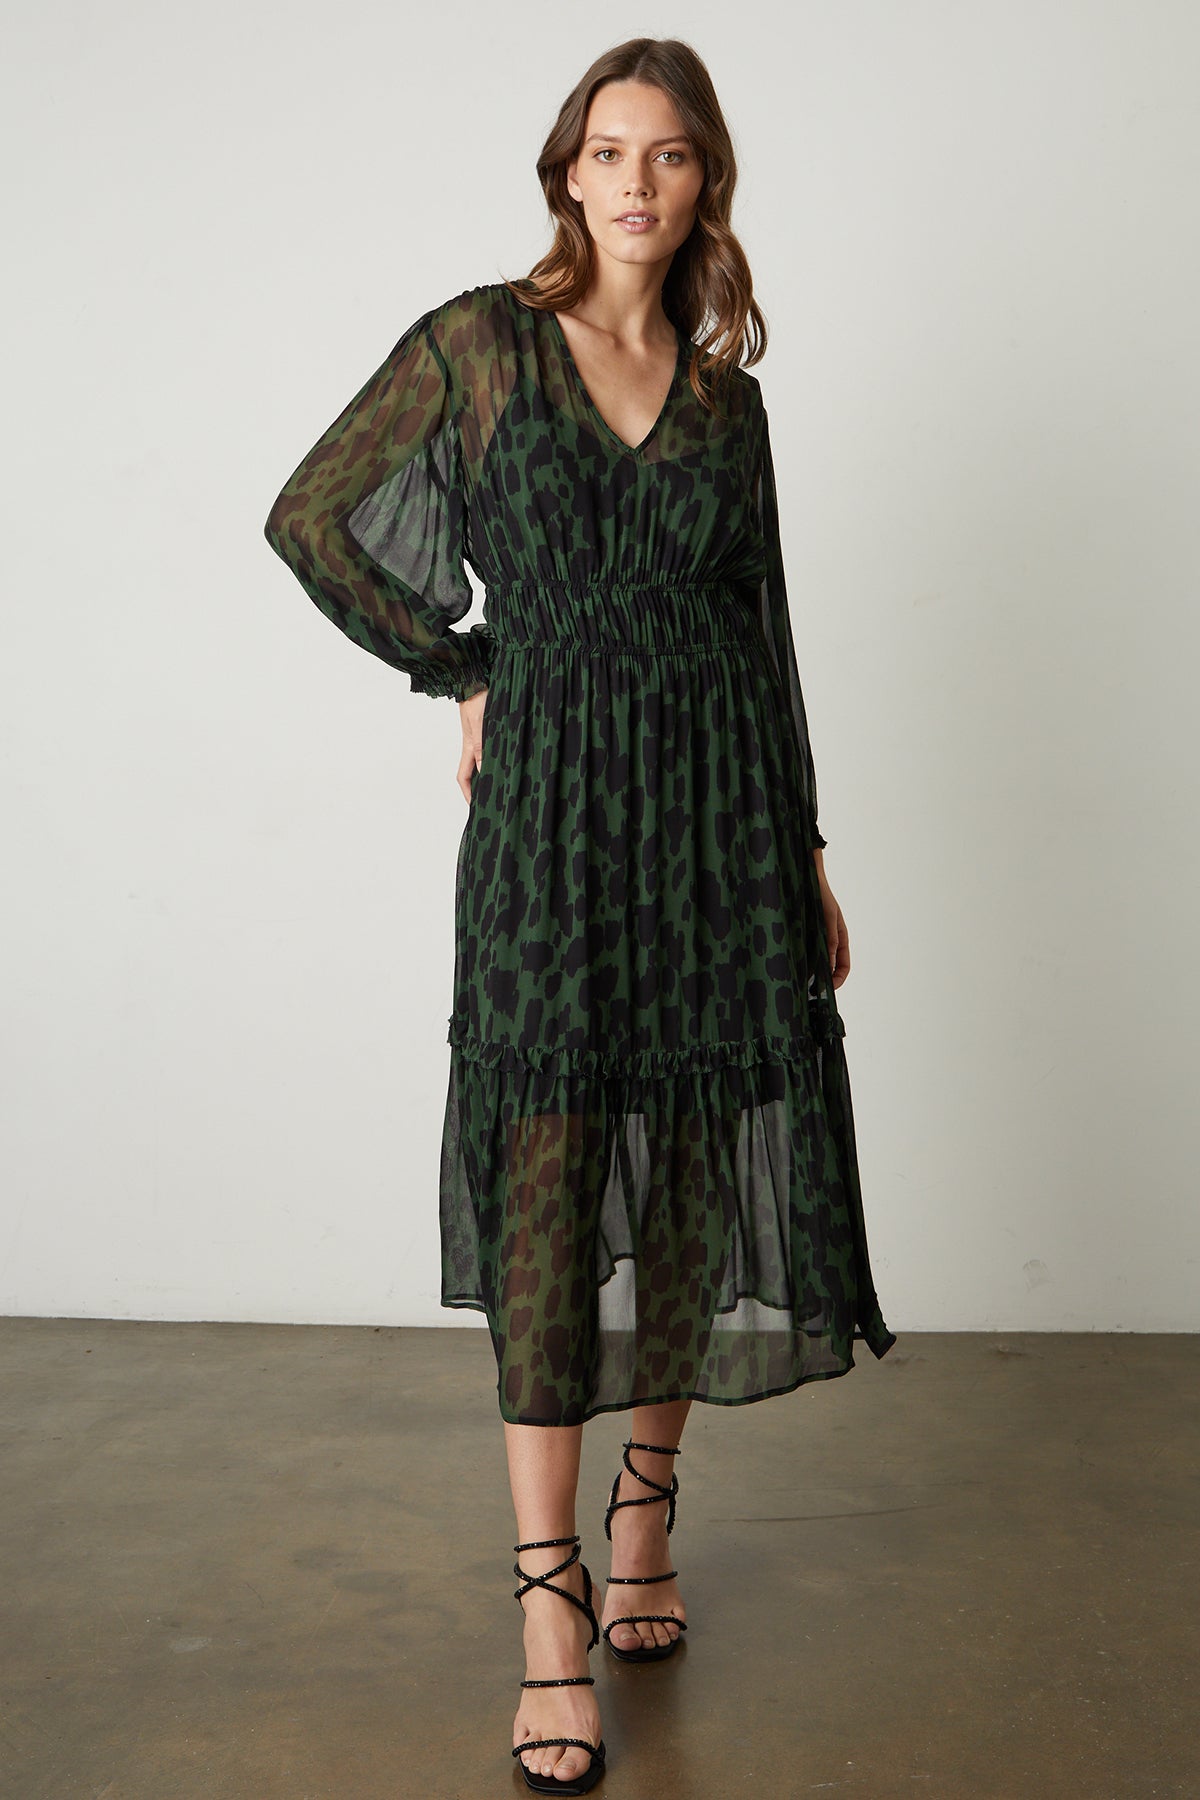 Kendra Printed Maxi Dress in green and black airbrush print with black sandals full length front-25669297438913